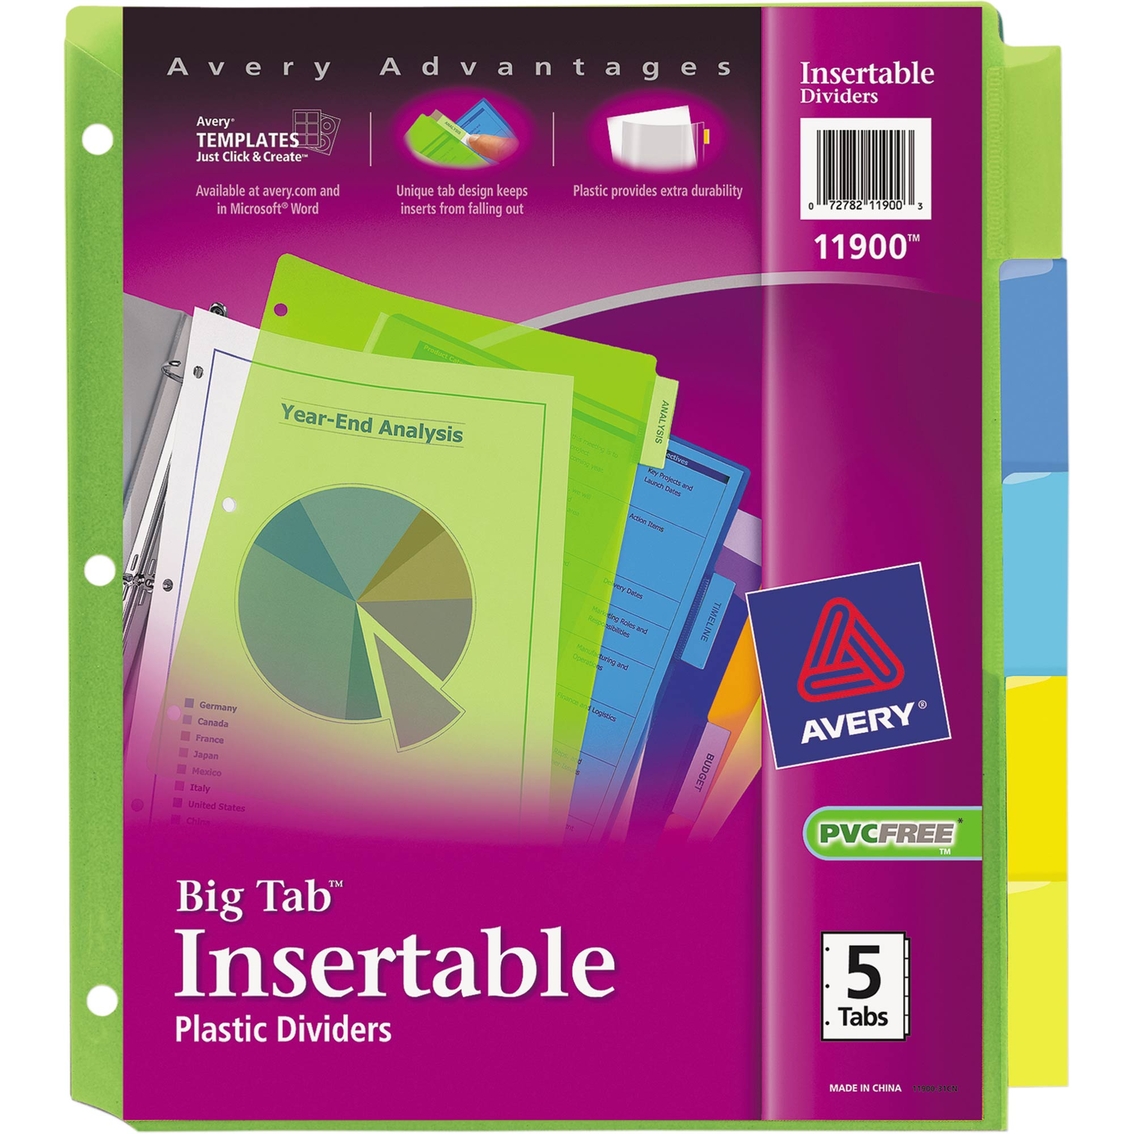 Avery Big Tab Plastic Insertable 5 Tab, 11 x 8 1/2 in. Divider 5 pc. Set - Image 2 of 2